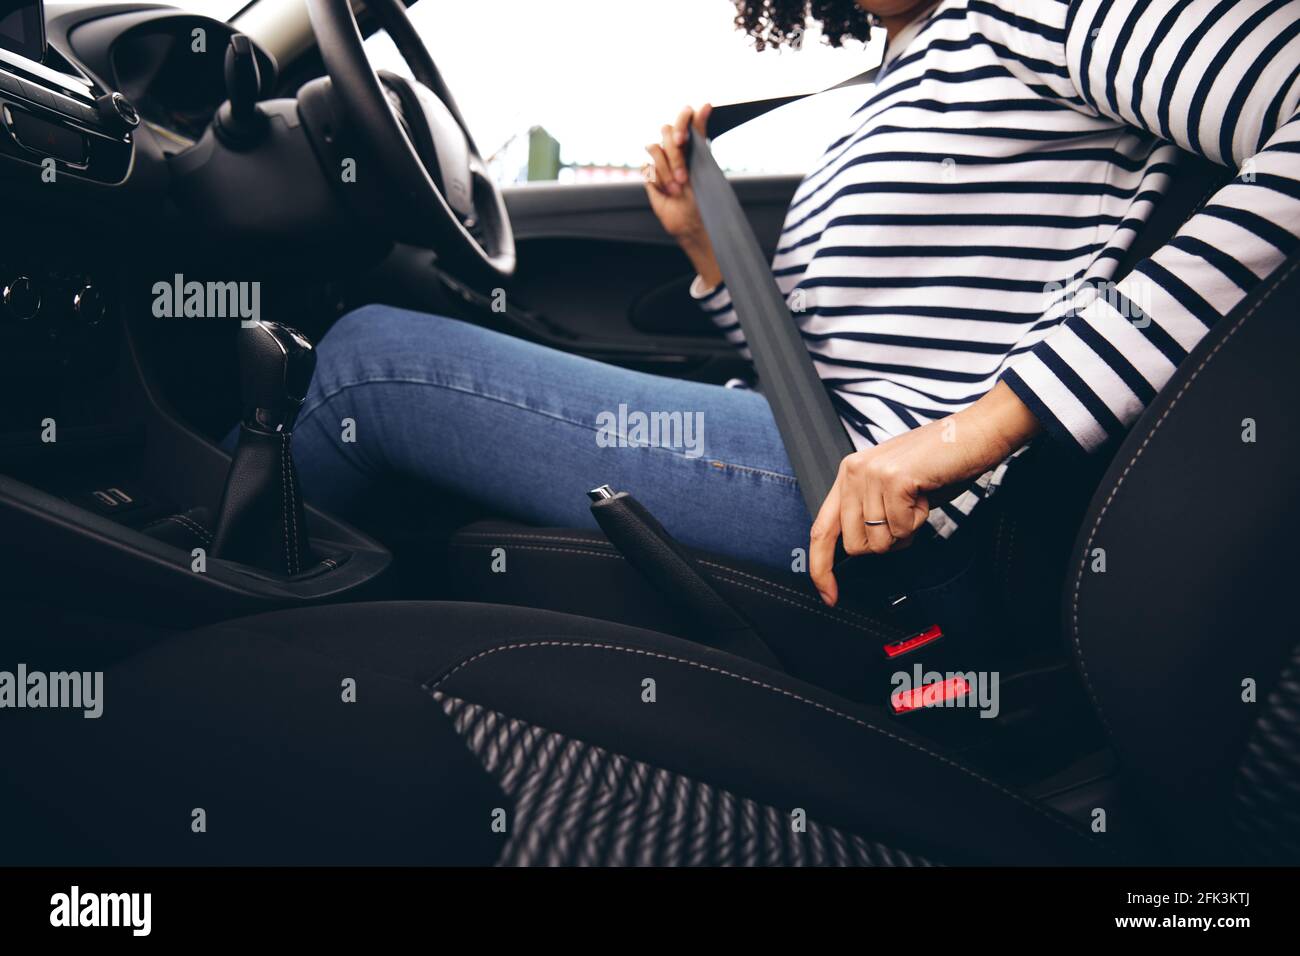 Close up of female driver in car fastening seatbelt at start of journey Stock Photo